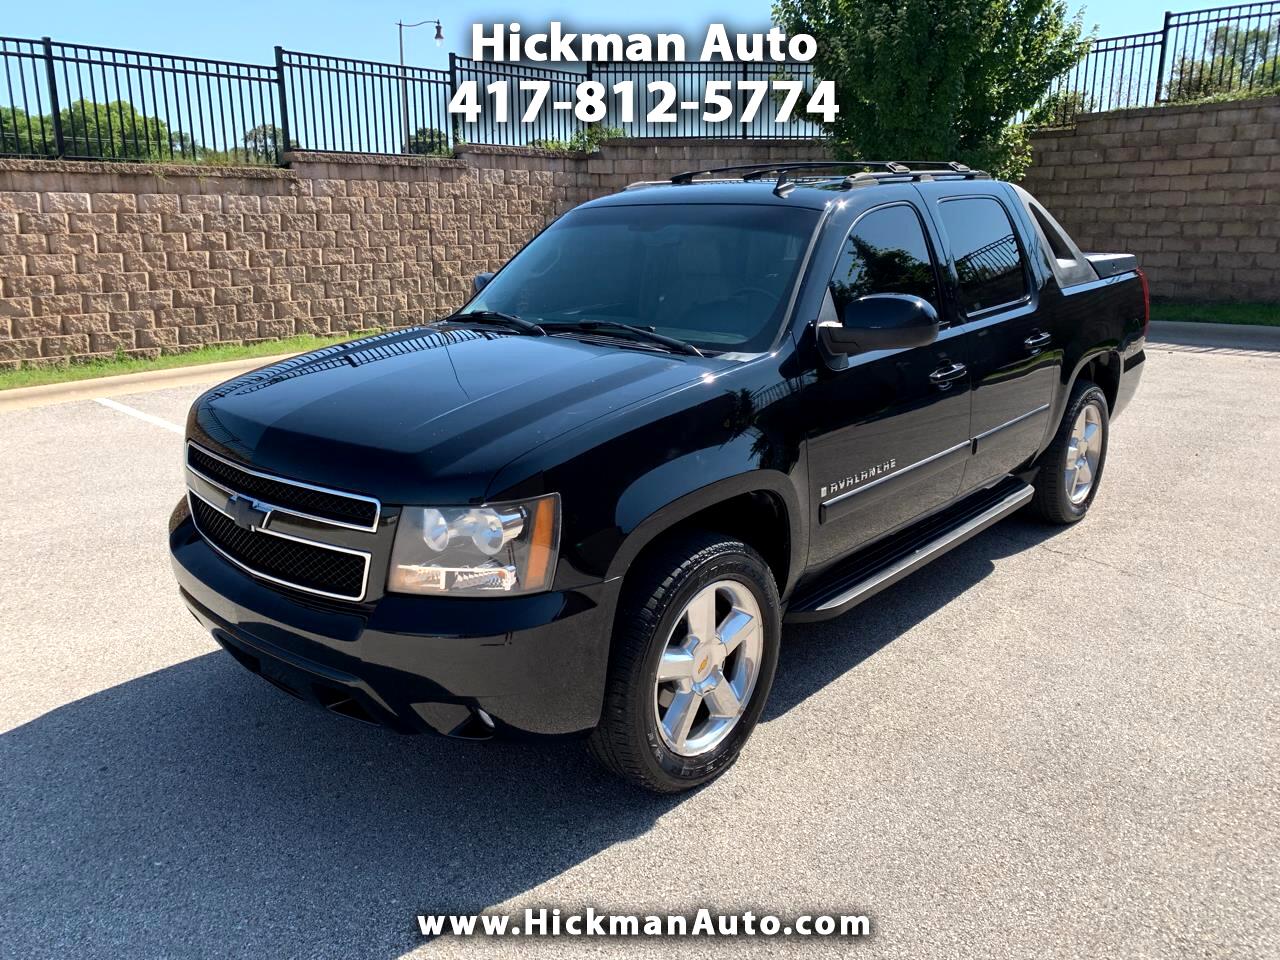 Used 2007 Chevrolet Avalanche Ltz 4wd For Sale In